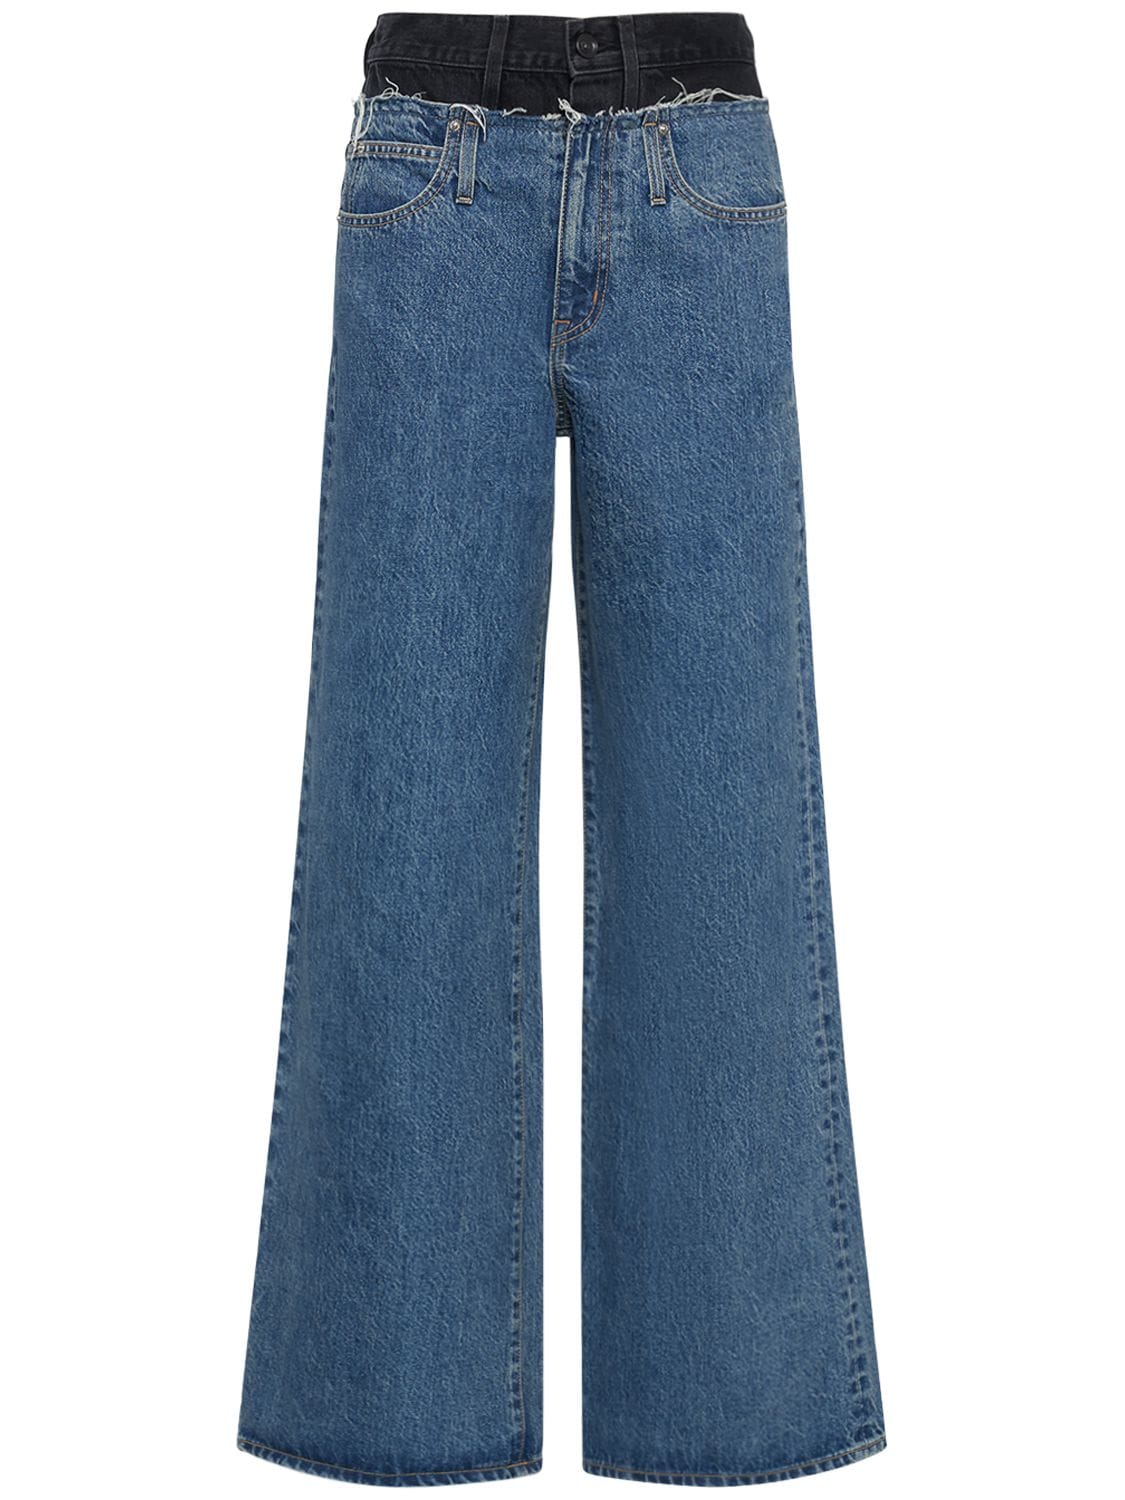 SLVRLAKE RE-WORKED EVA DOUBLE WAISTBAND JEANS